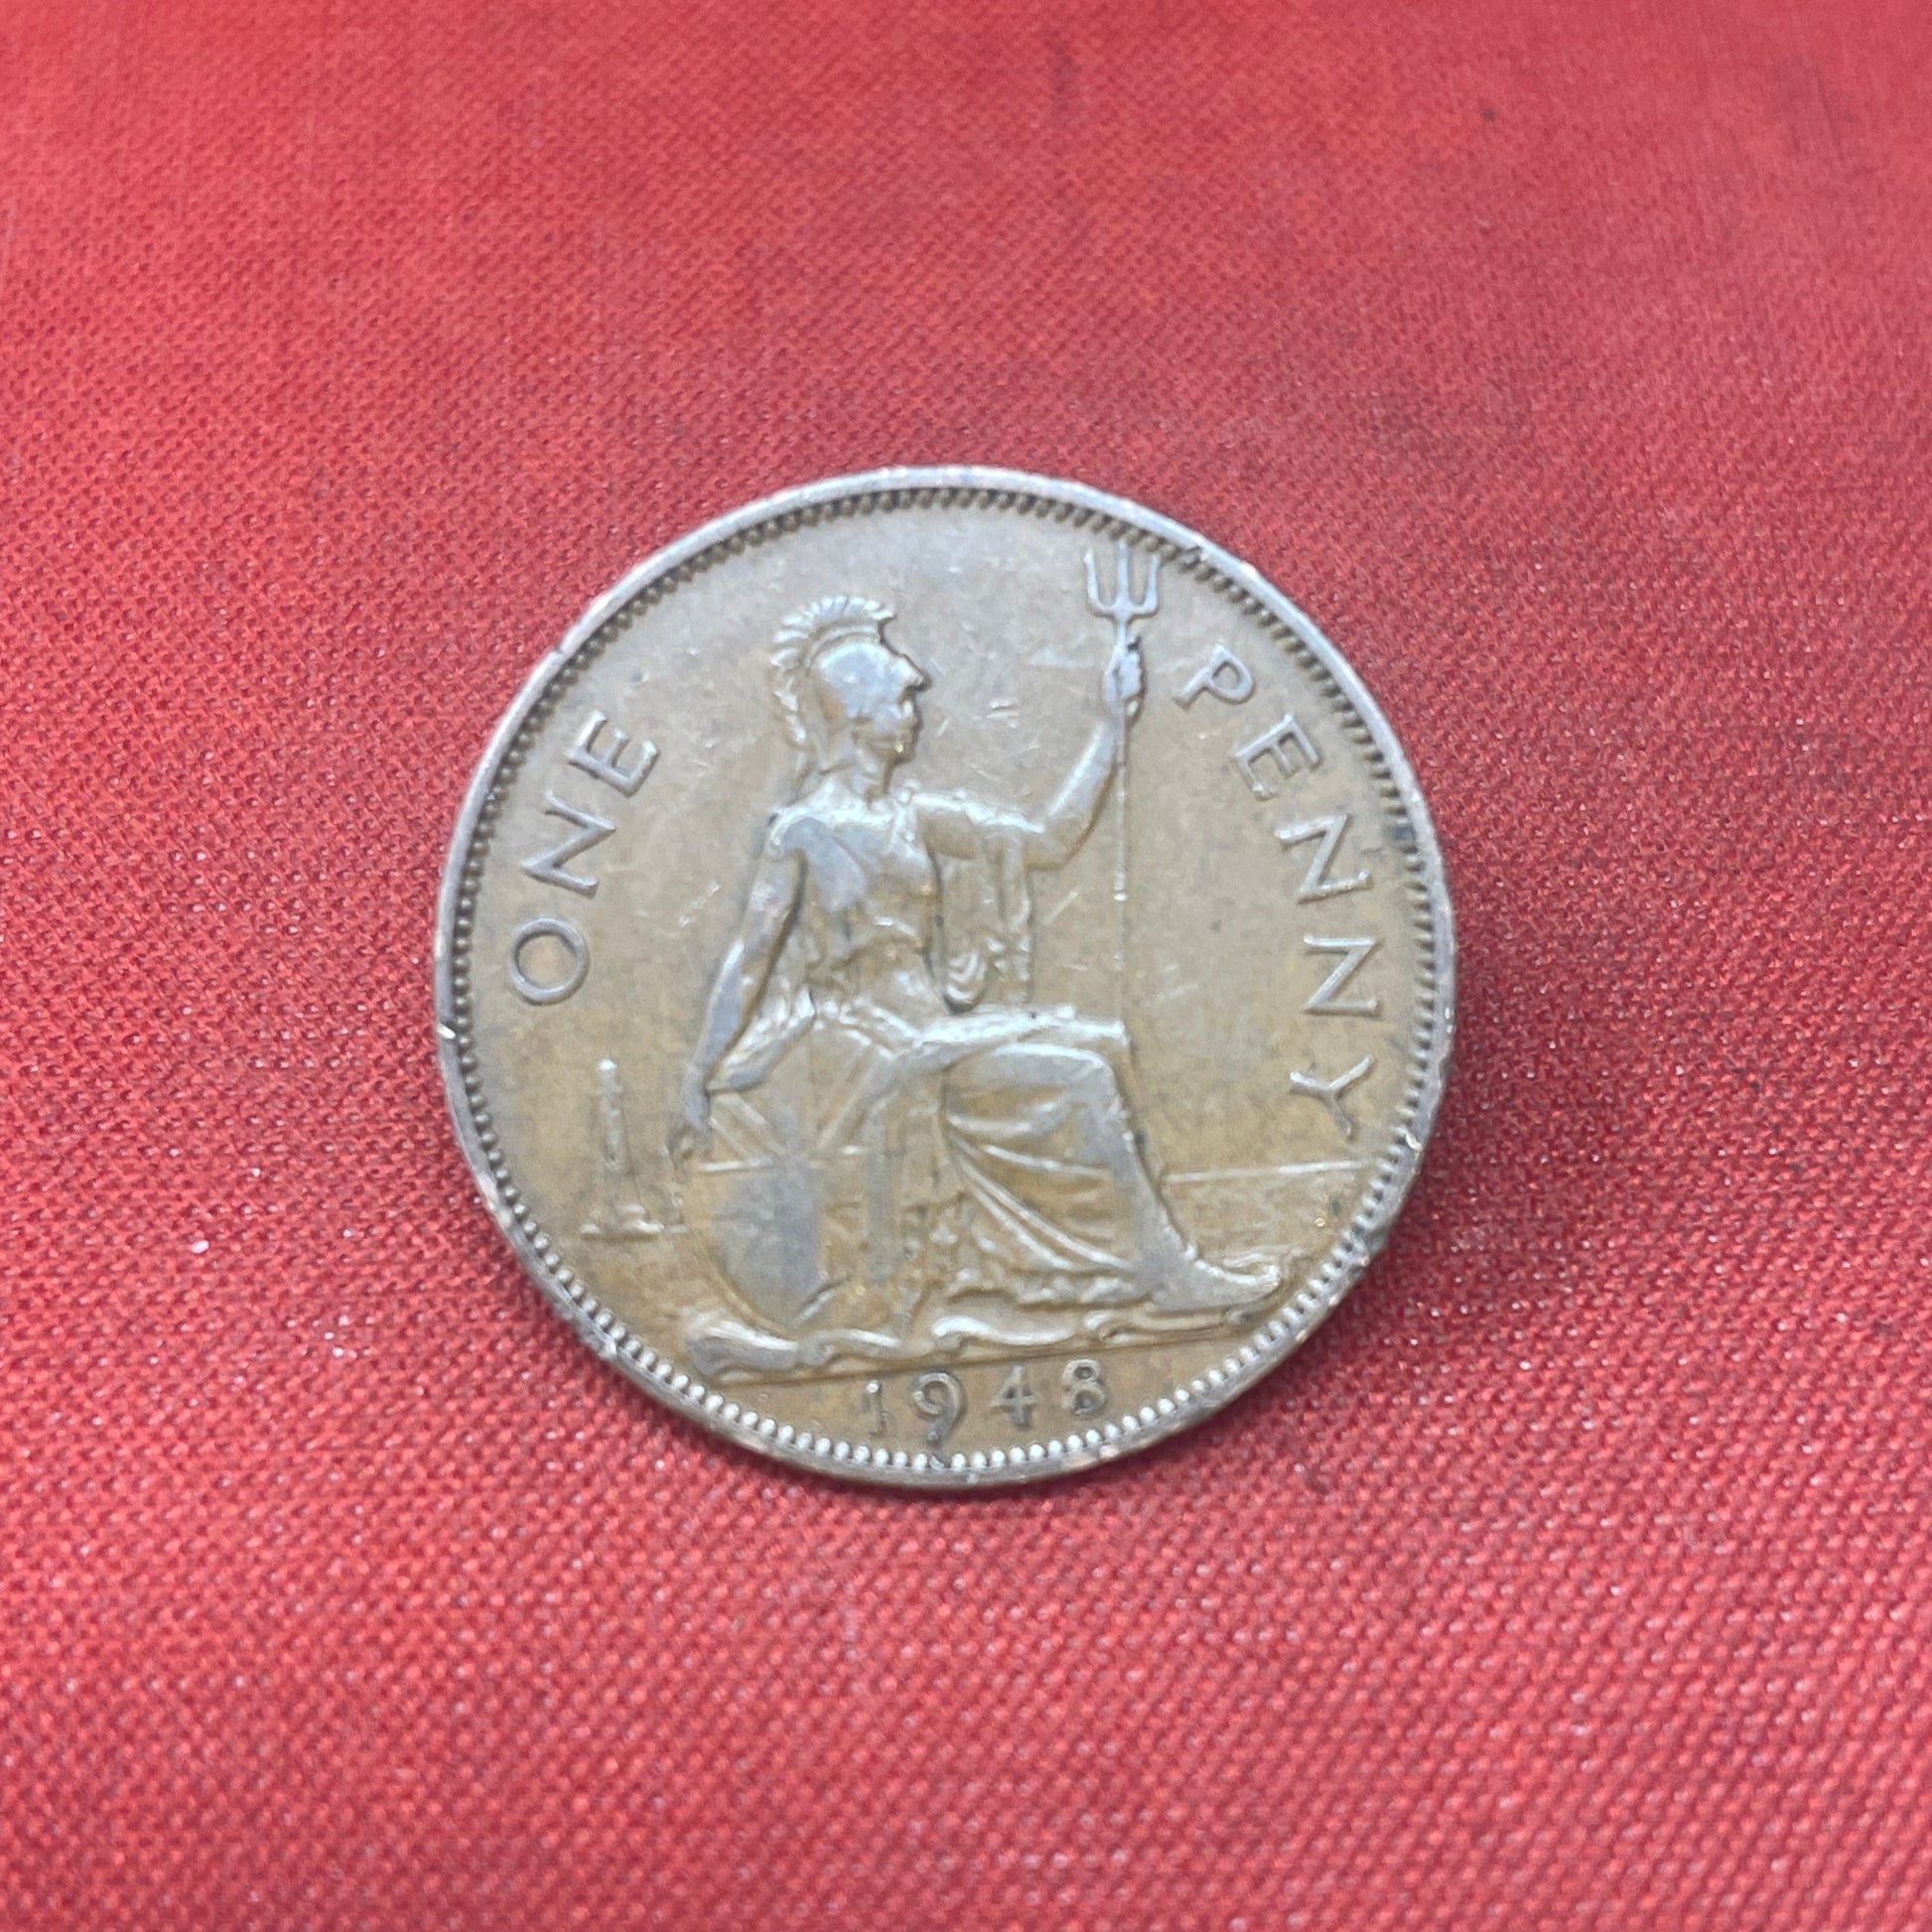 King George VI 1947 One Penny